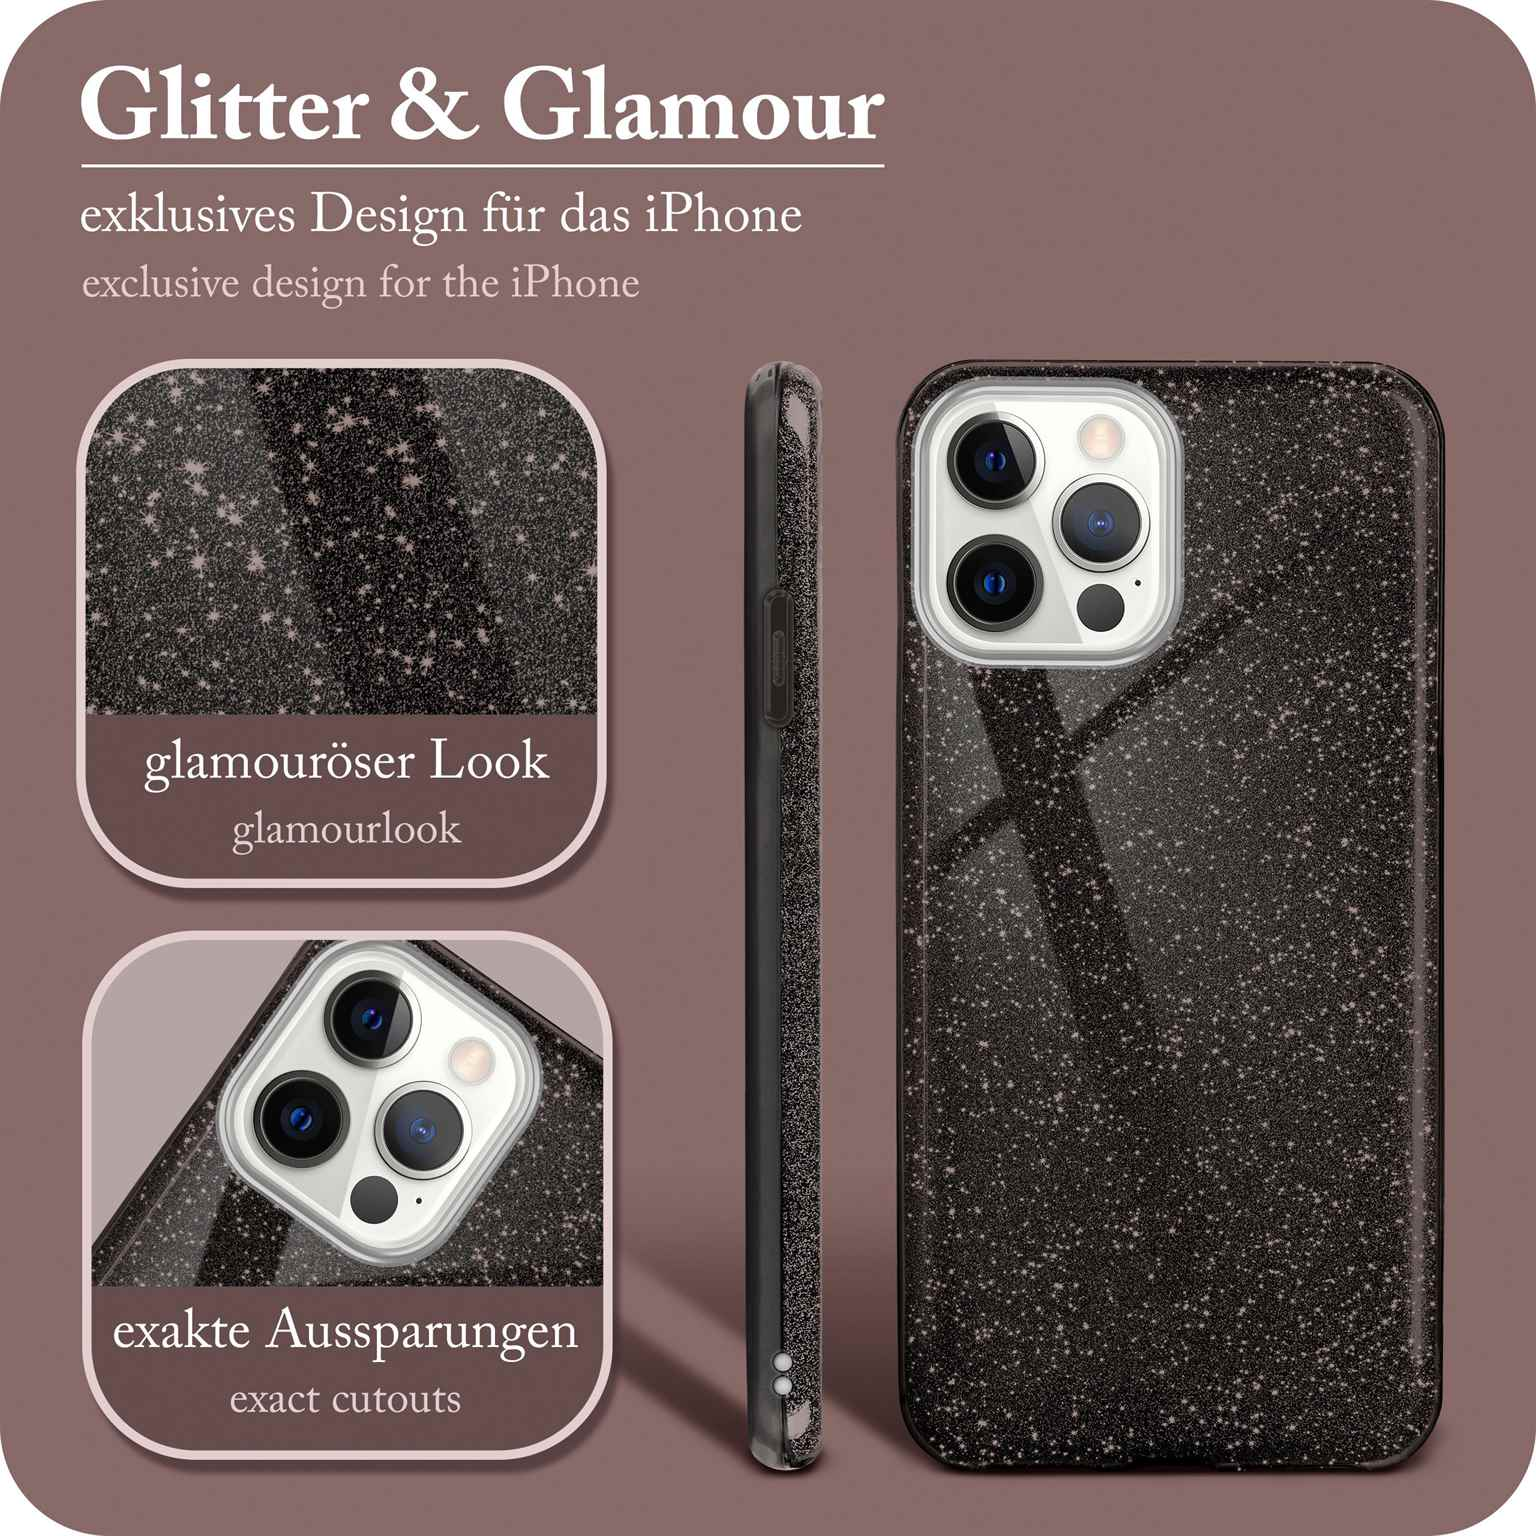 Case, 12 Glamour - Apple, Backcover, Black iPhone Pro Max, Glitter ONEFLOW